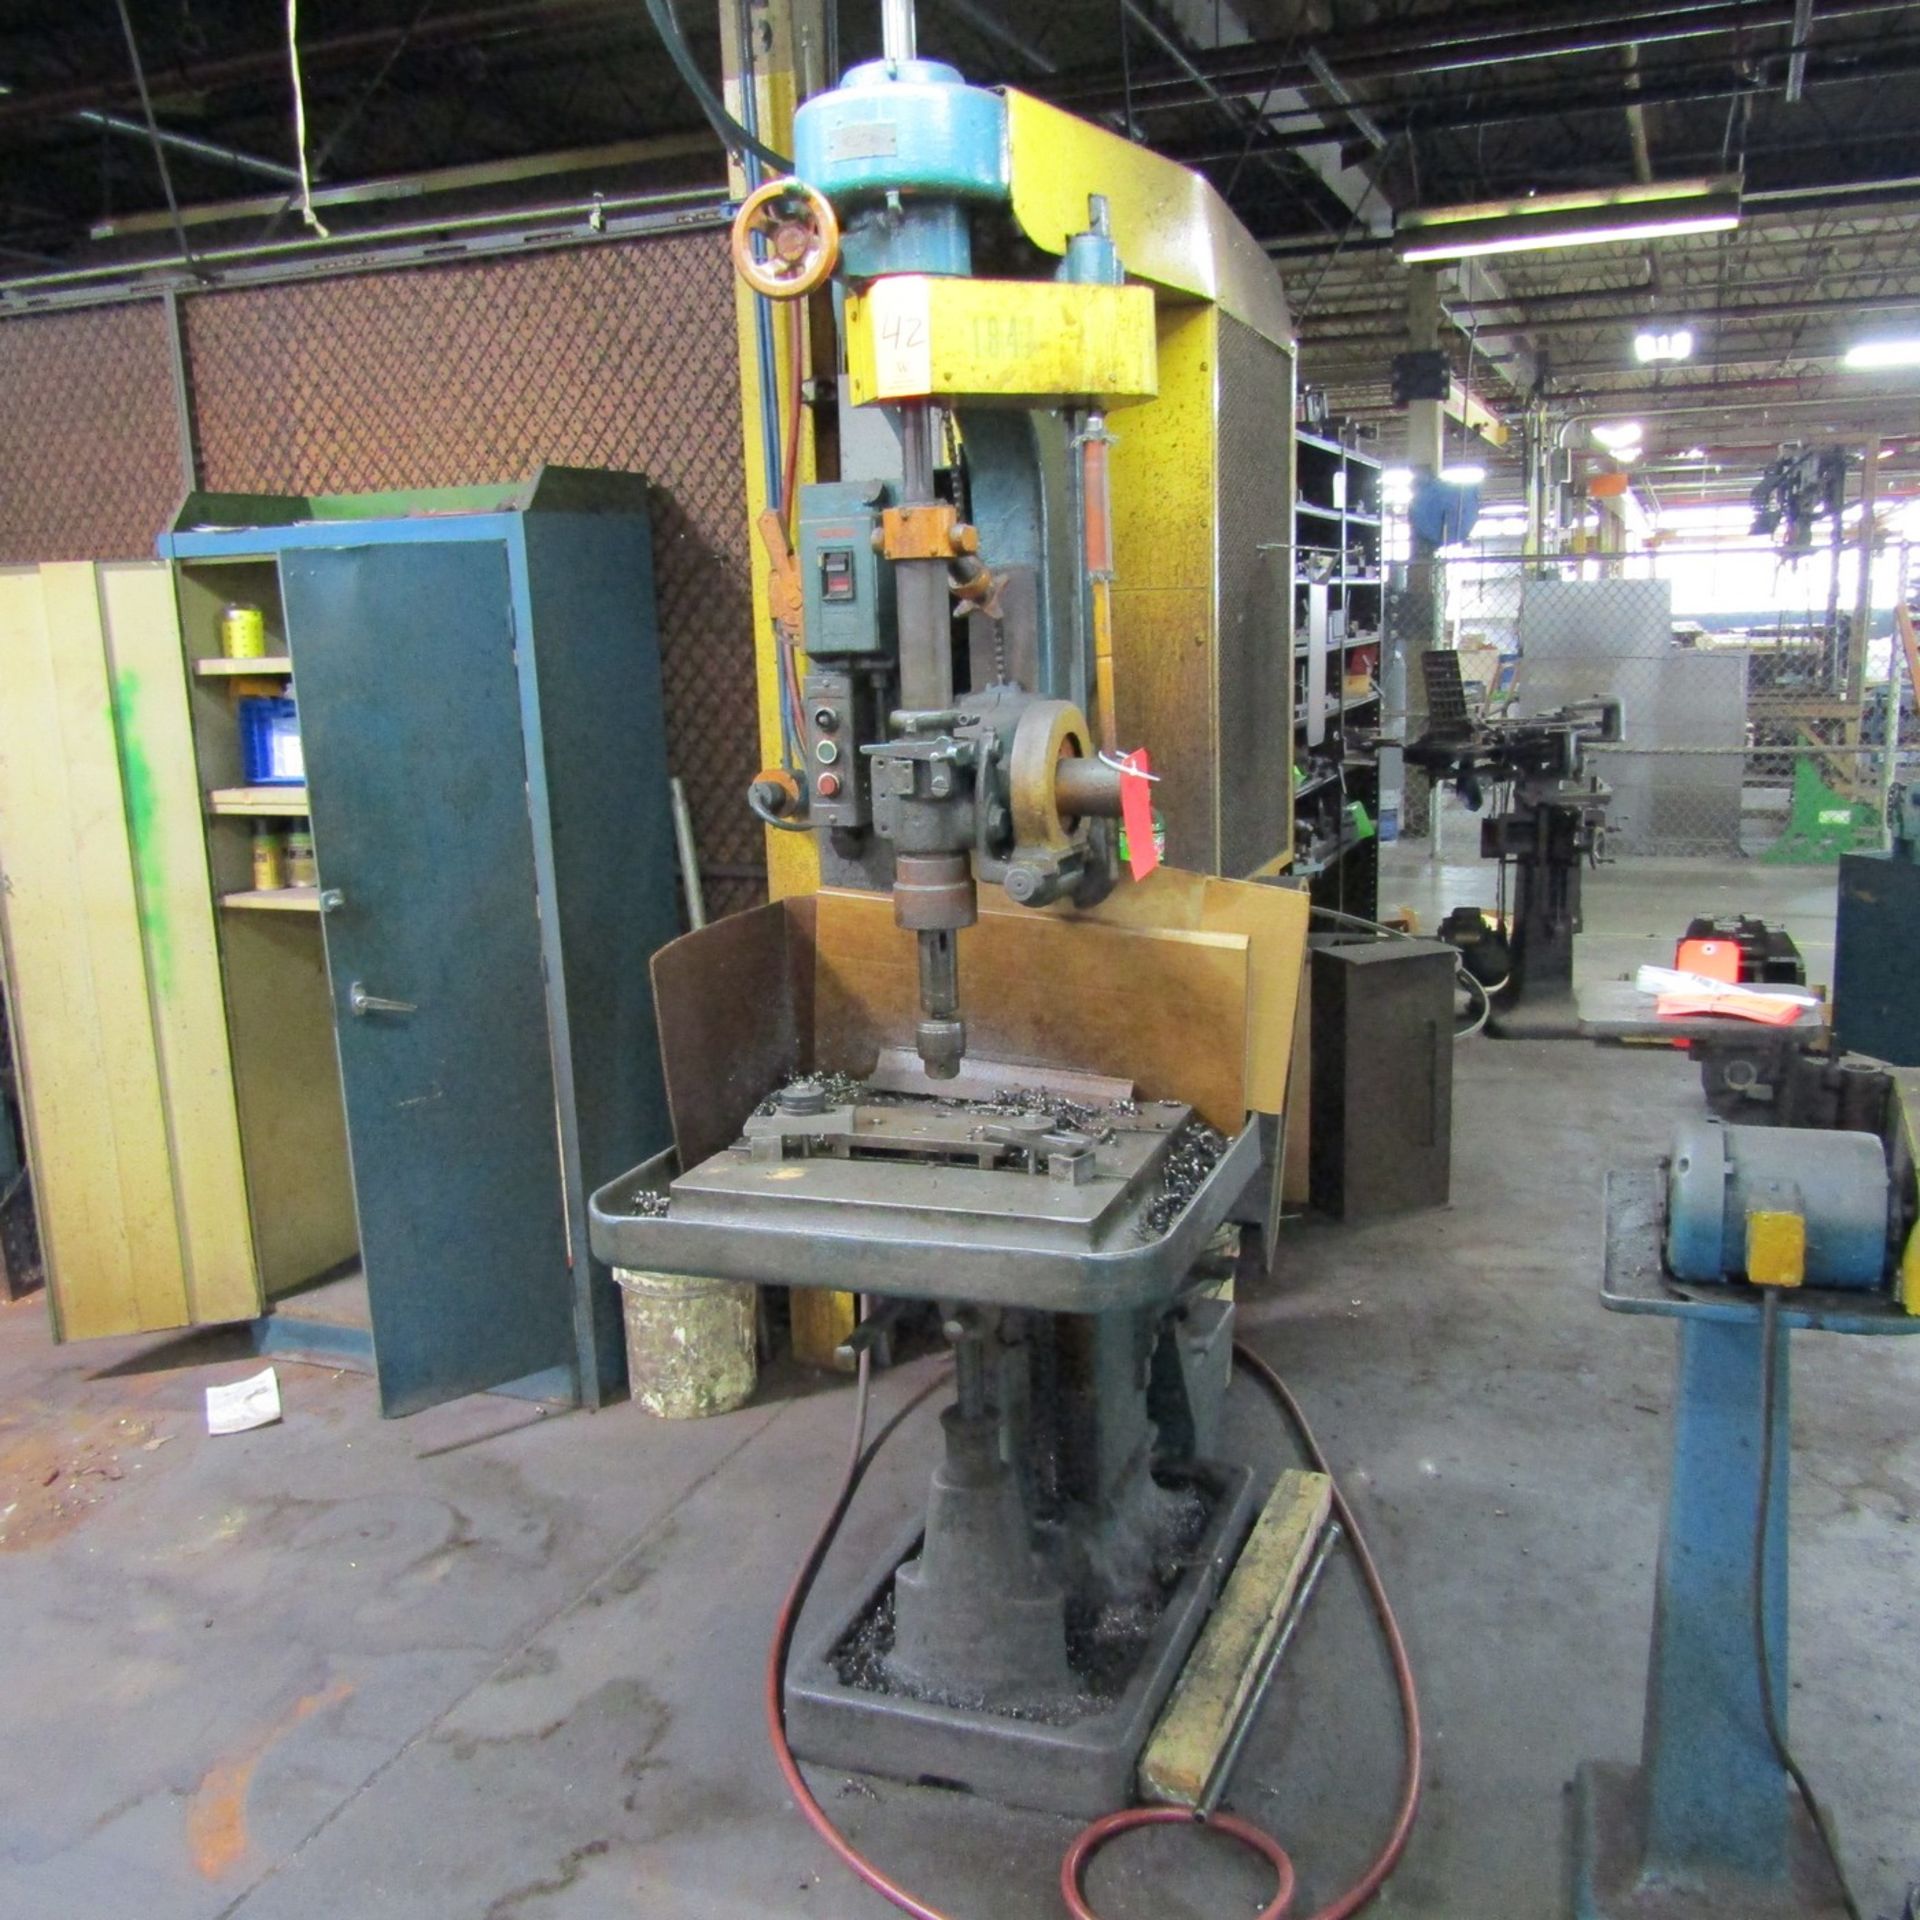 Avey 24 in. Single Spindle Vertical Boring Machine (Ref. #: 1847) - Image 2 of 4